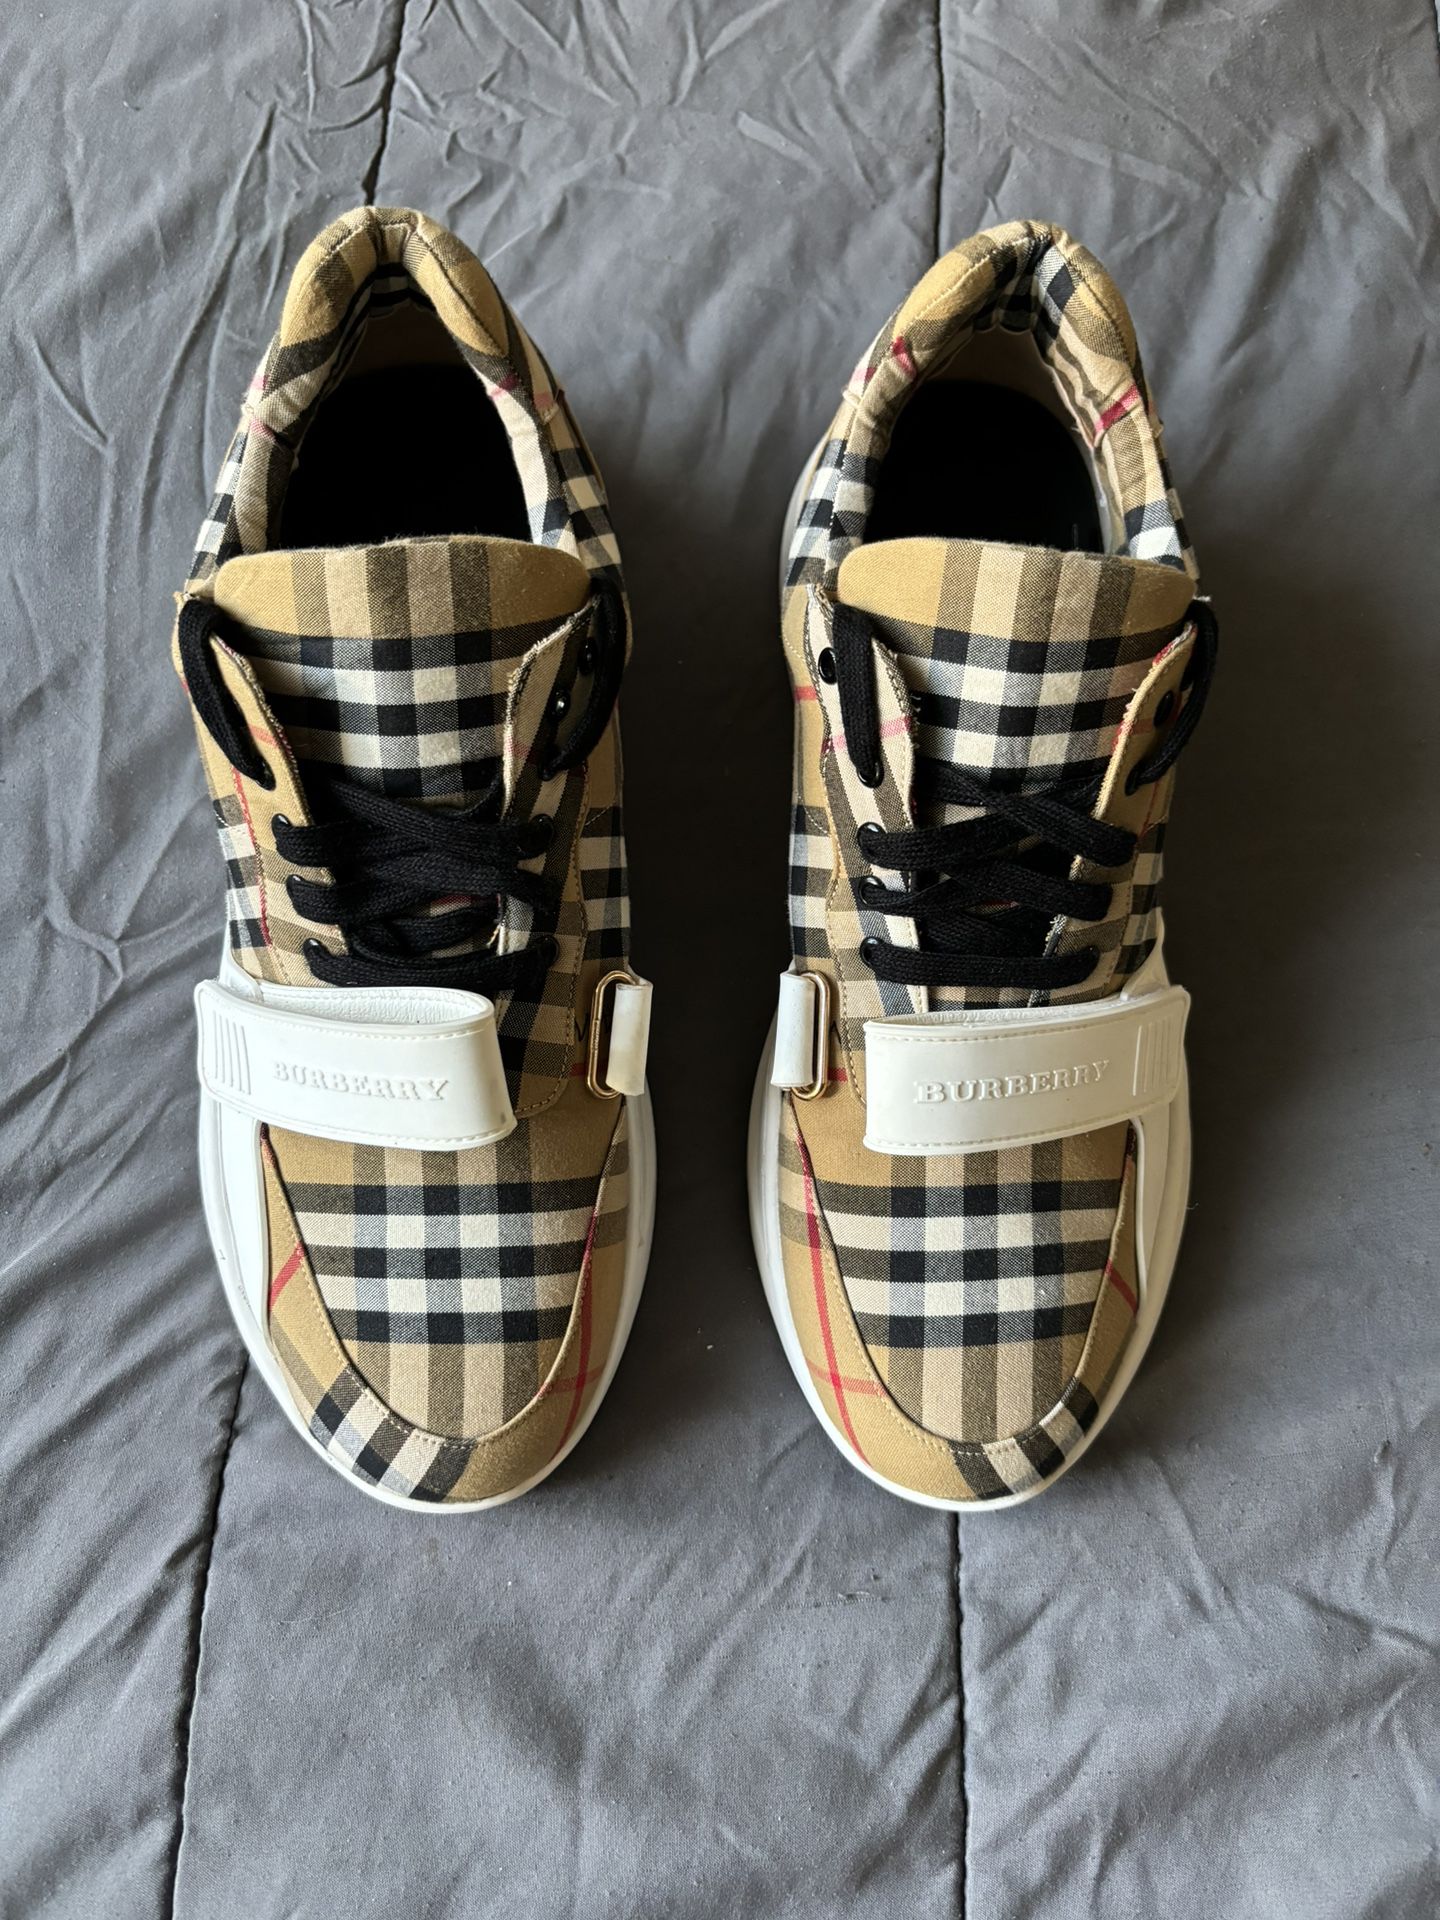 Burberry Check, Suede & Leather Sneakers Size 43 (Shipping Only)